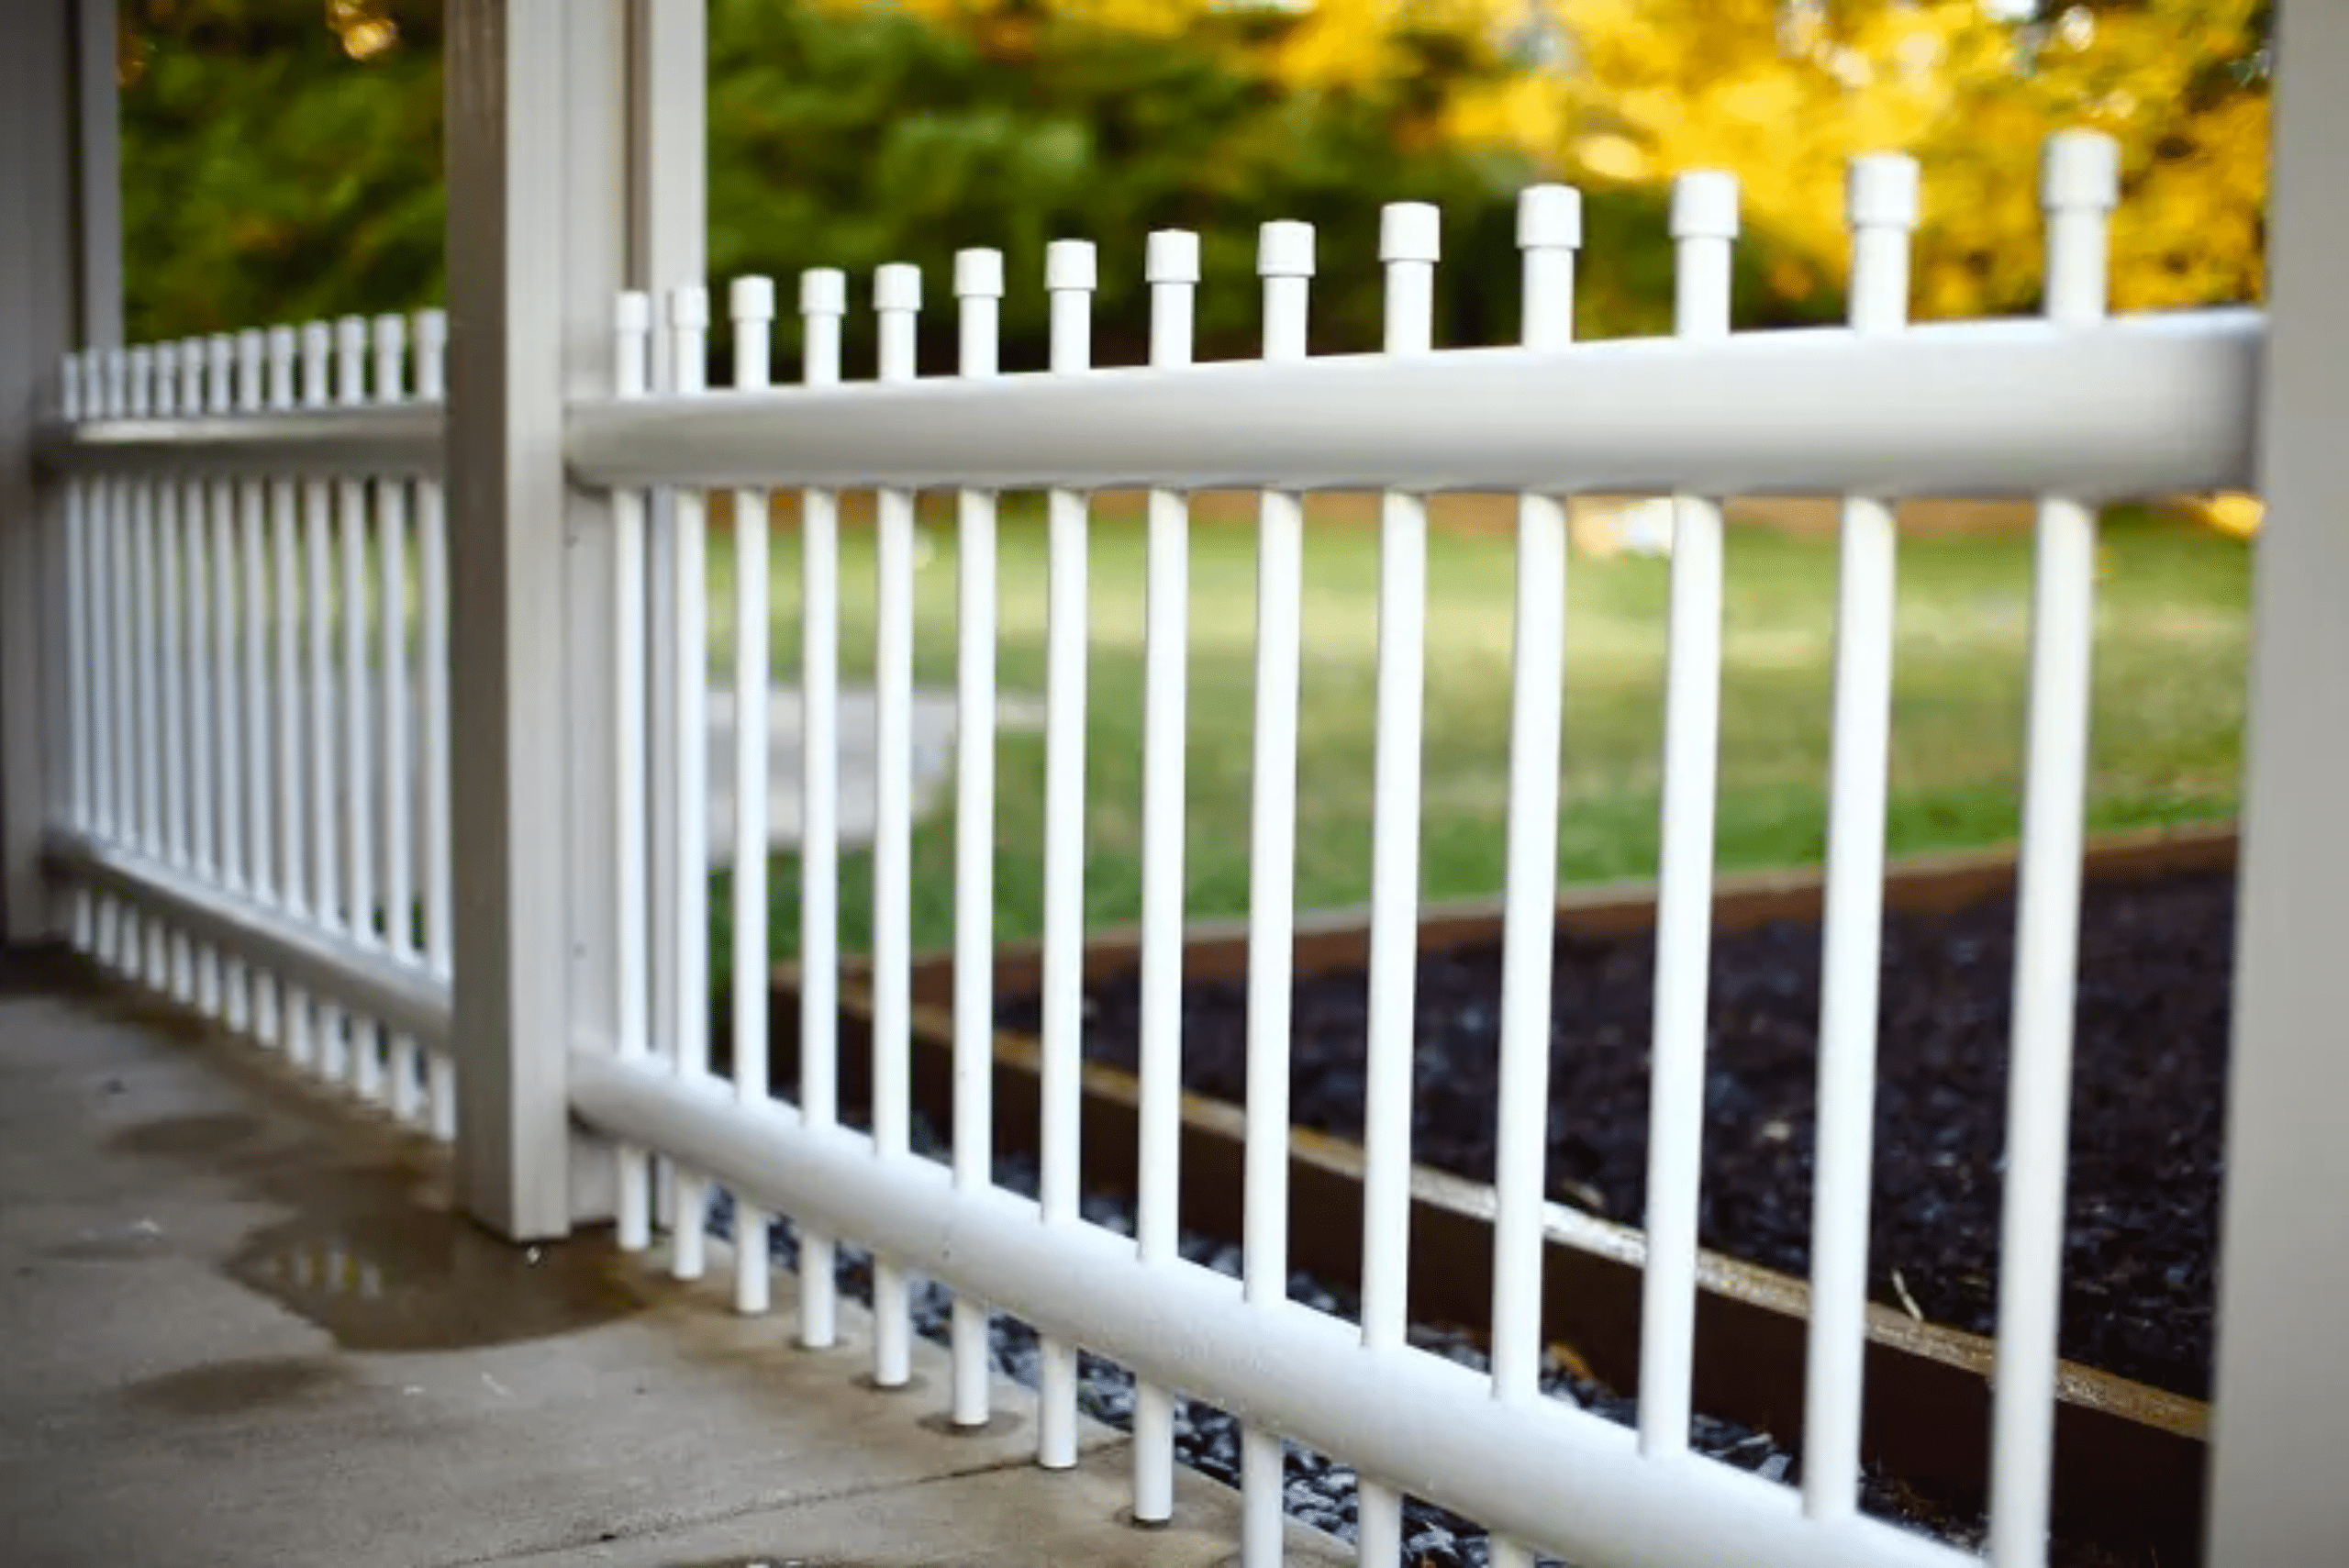 A fence made of white PCV piping.